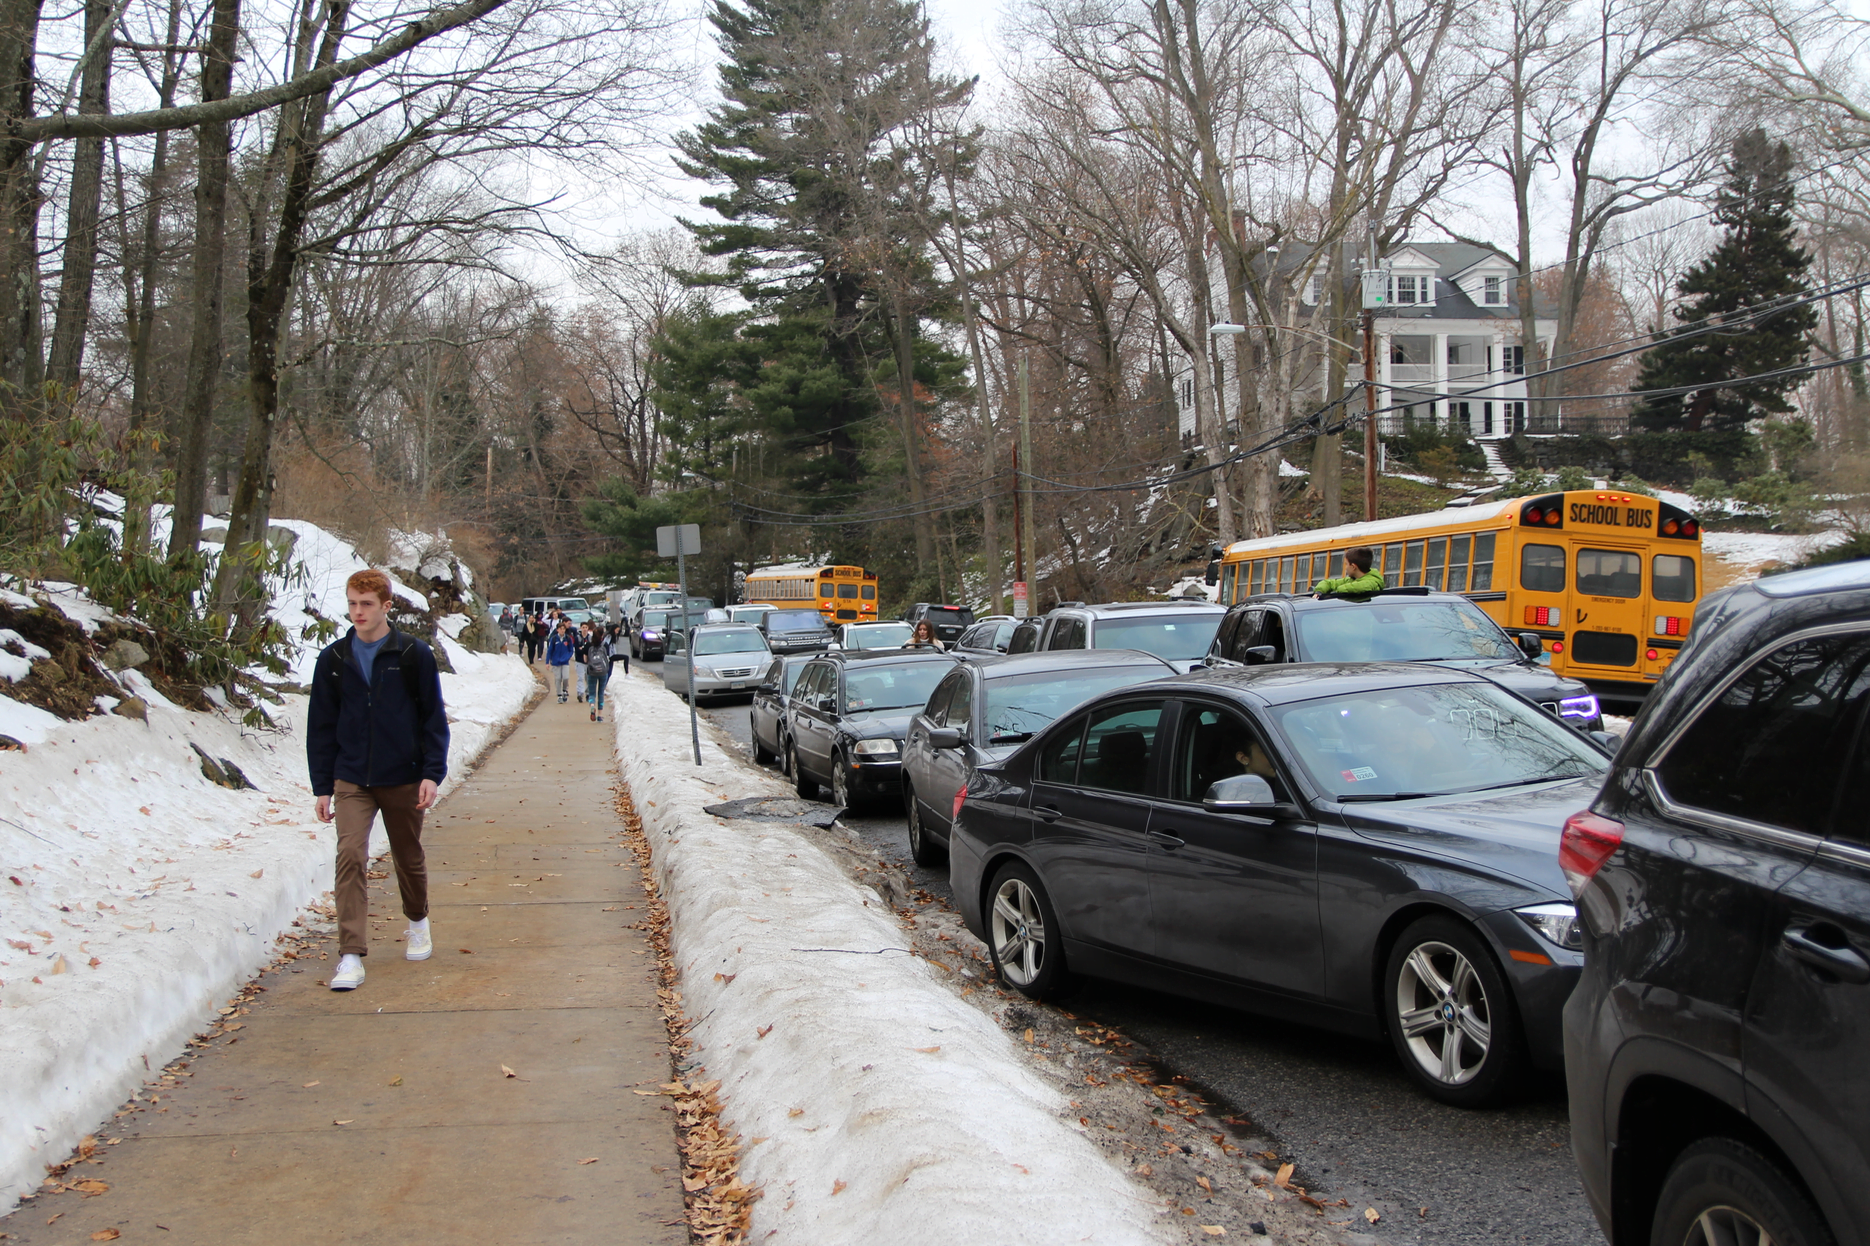 At about 3:15pm, cars double park on Hillside Rd waiting for dismissal. Jan 11, 2018 Photo: Leslie Yager